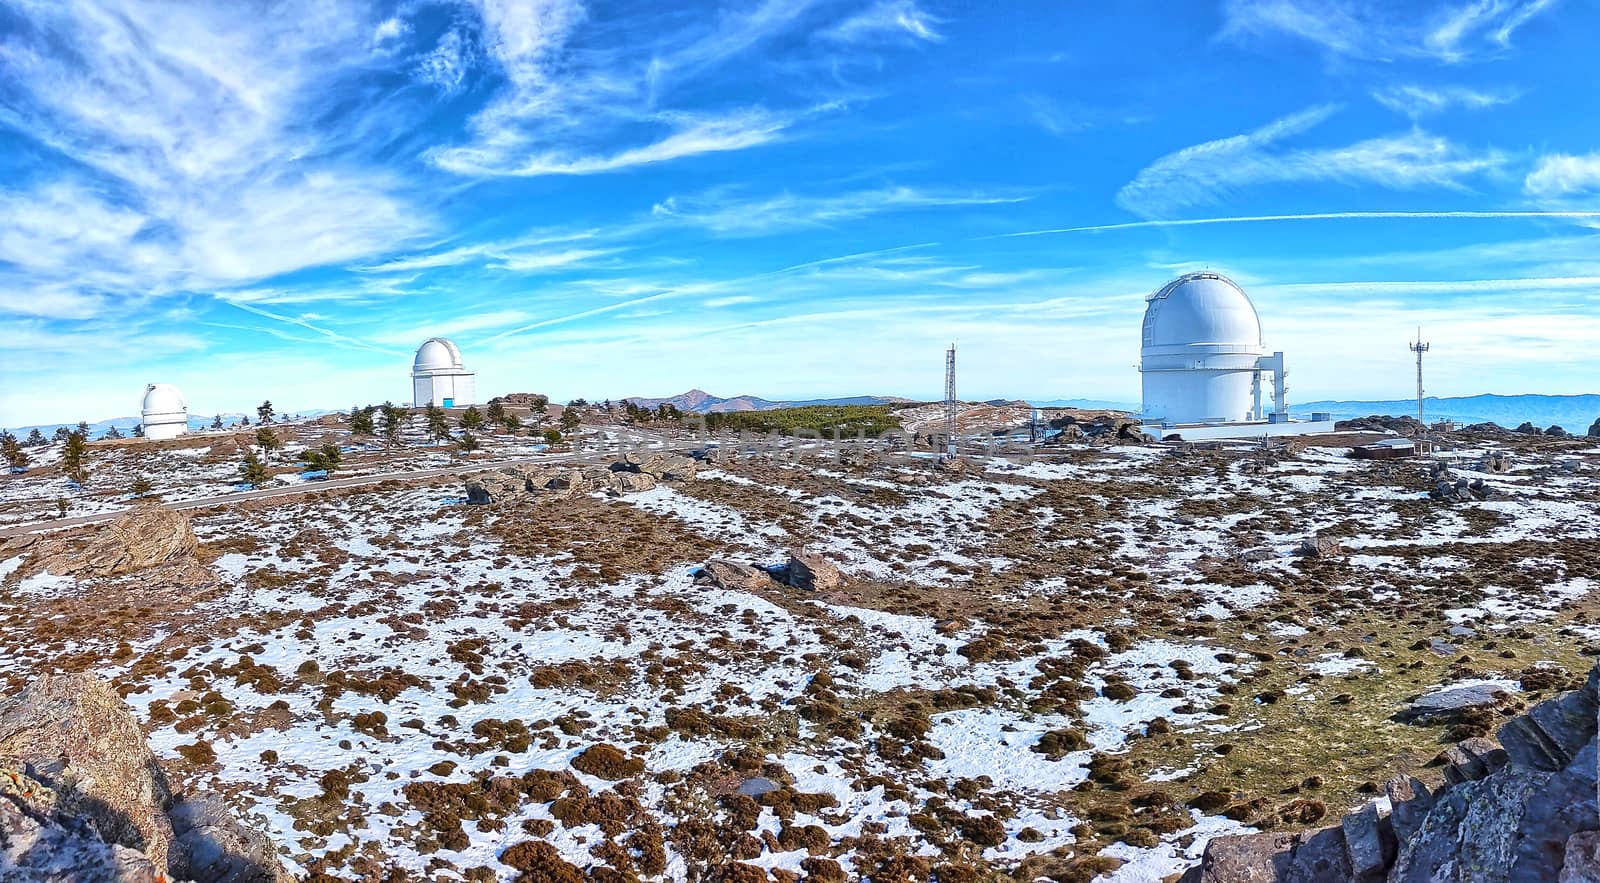 Panoramic of Calar Alto Observatory at the snowy mountain top in Almeria, Andalusia, Spain, 2019. Sky passing through against the domes. by worledit